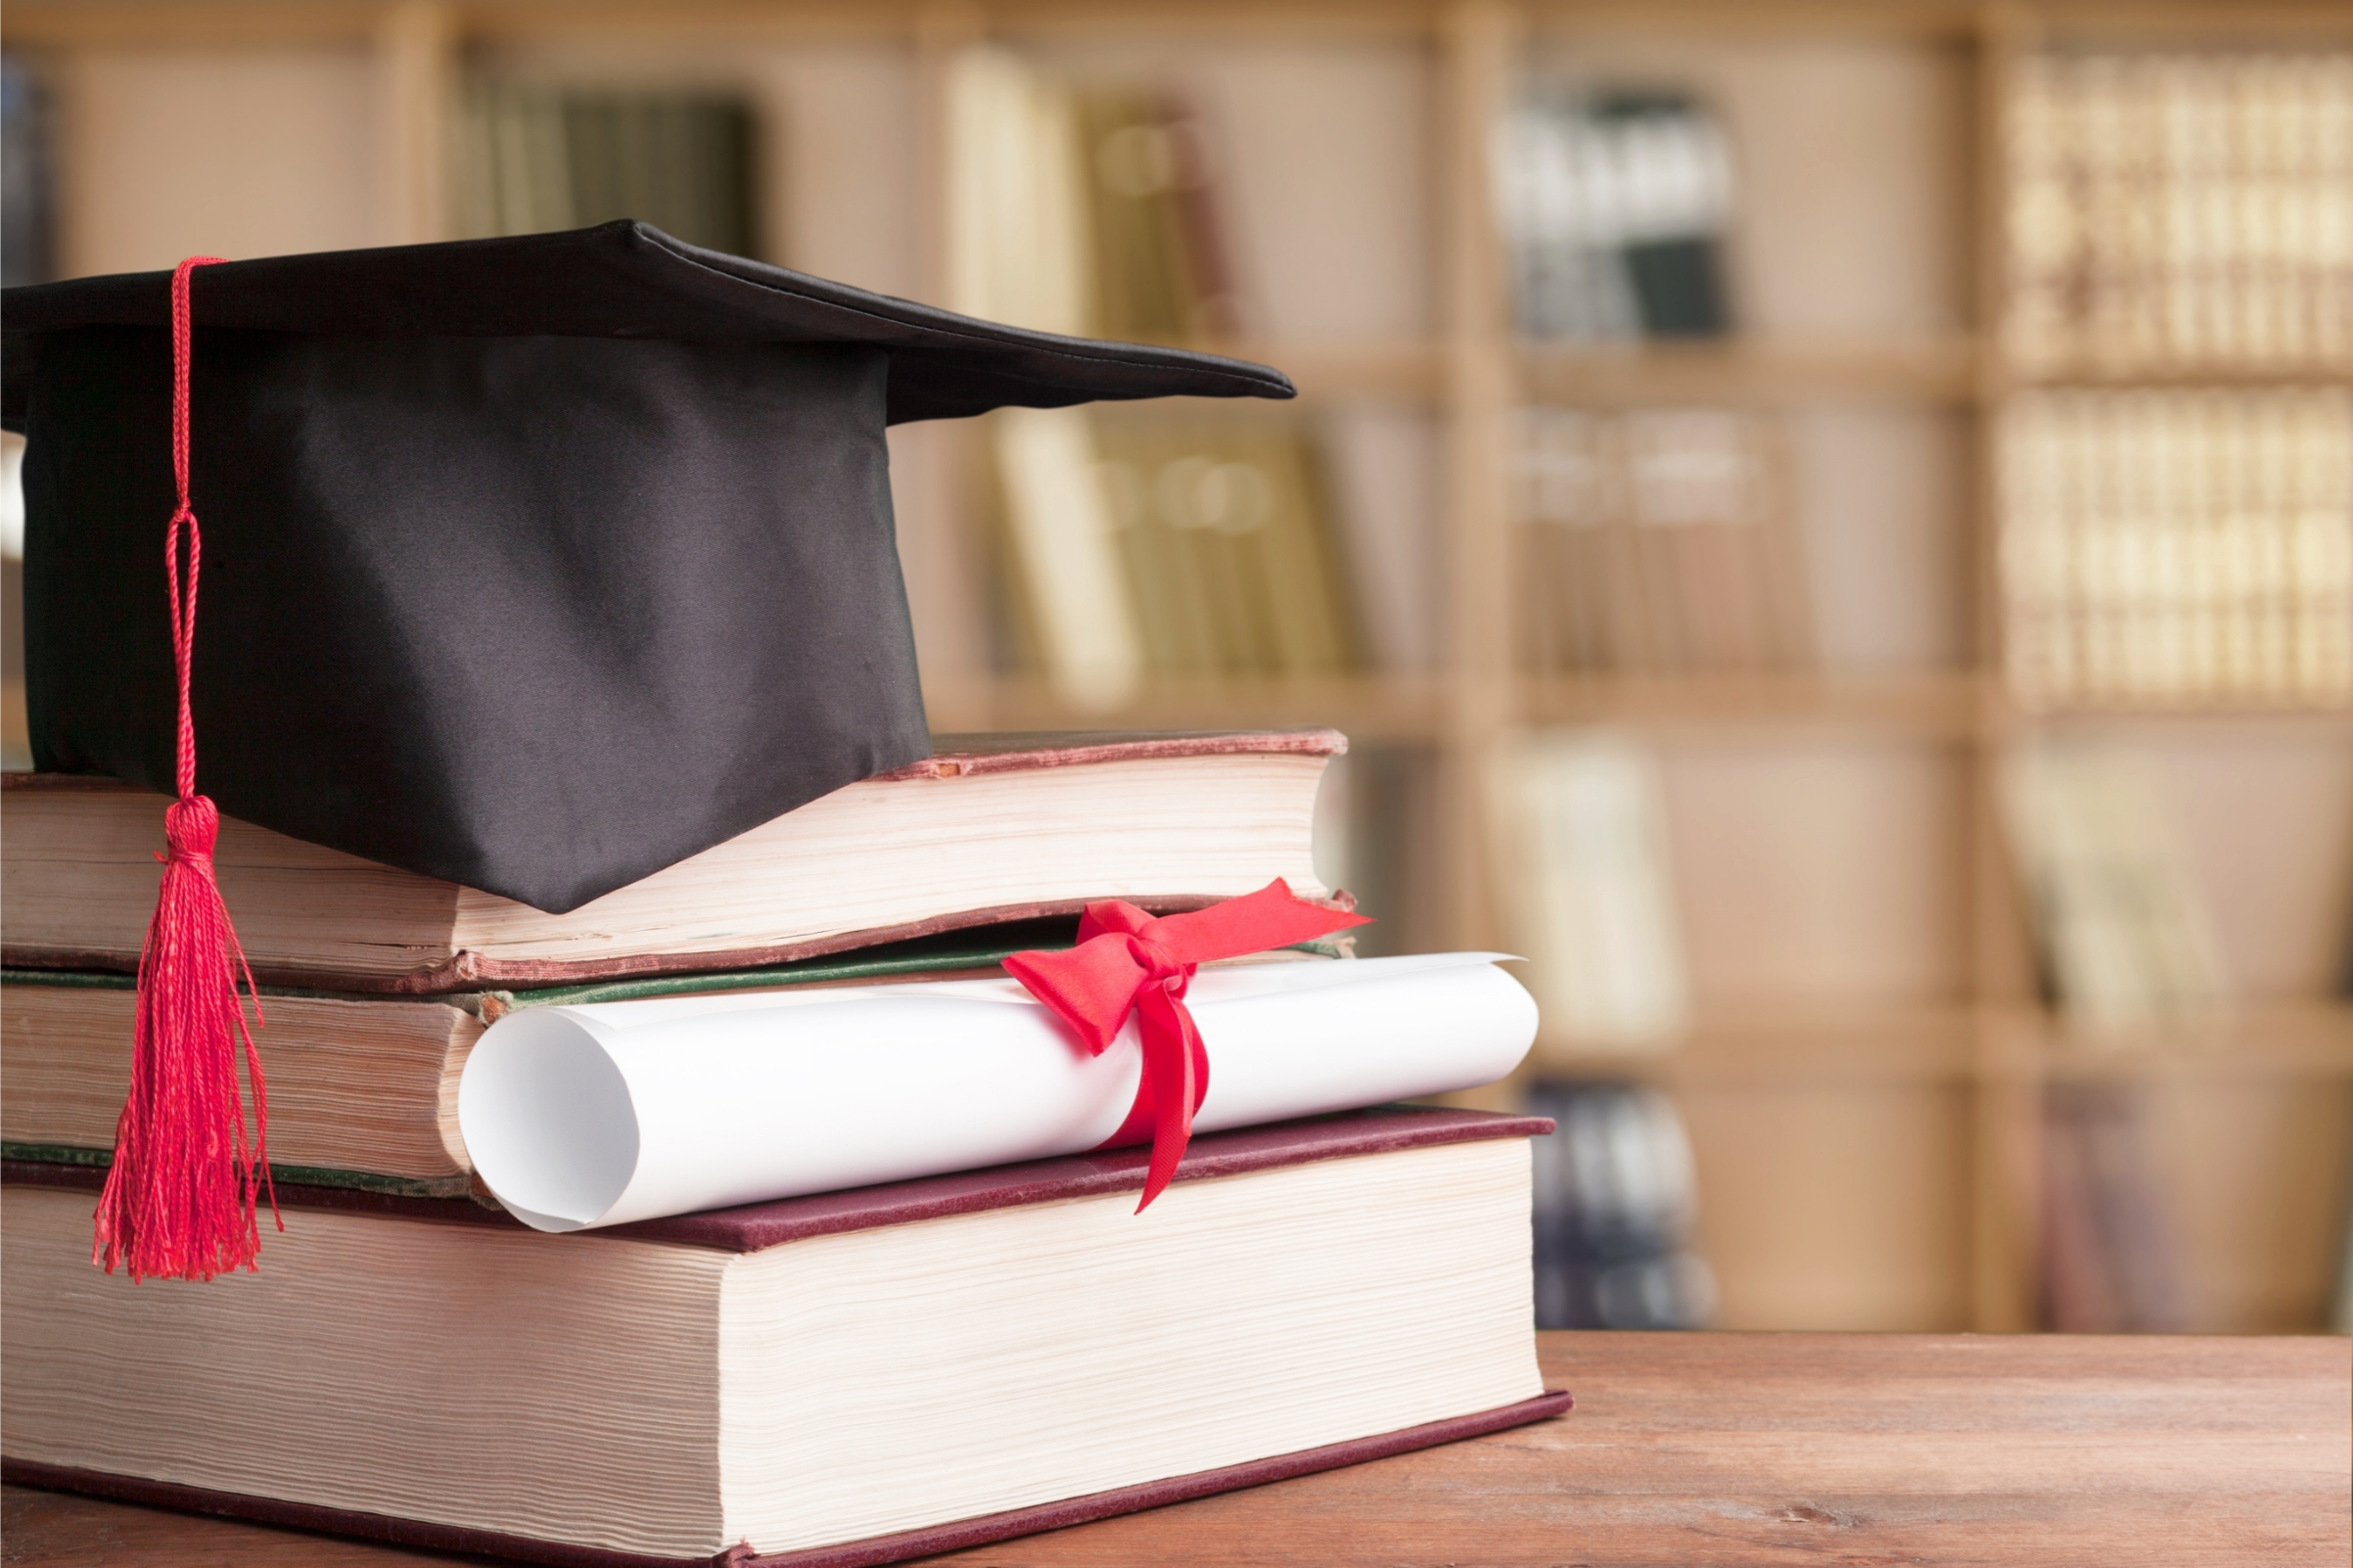 Graduate hat on top of books with degree